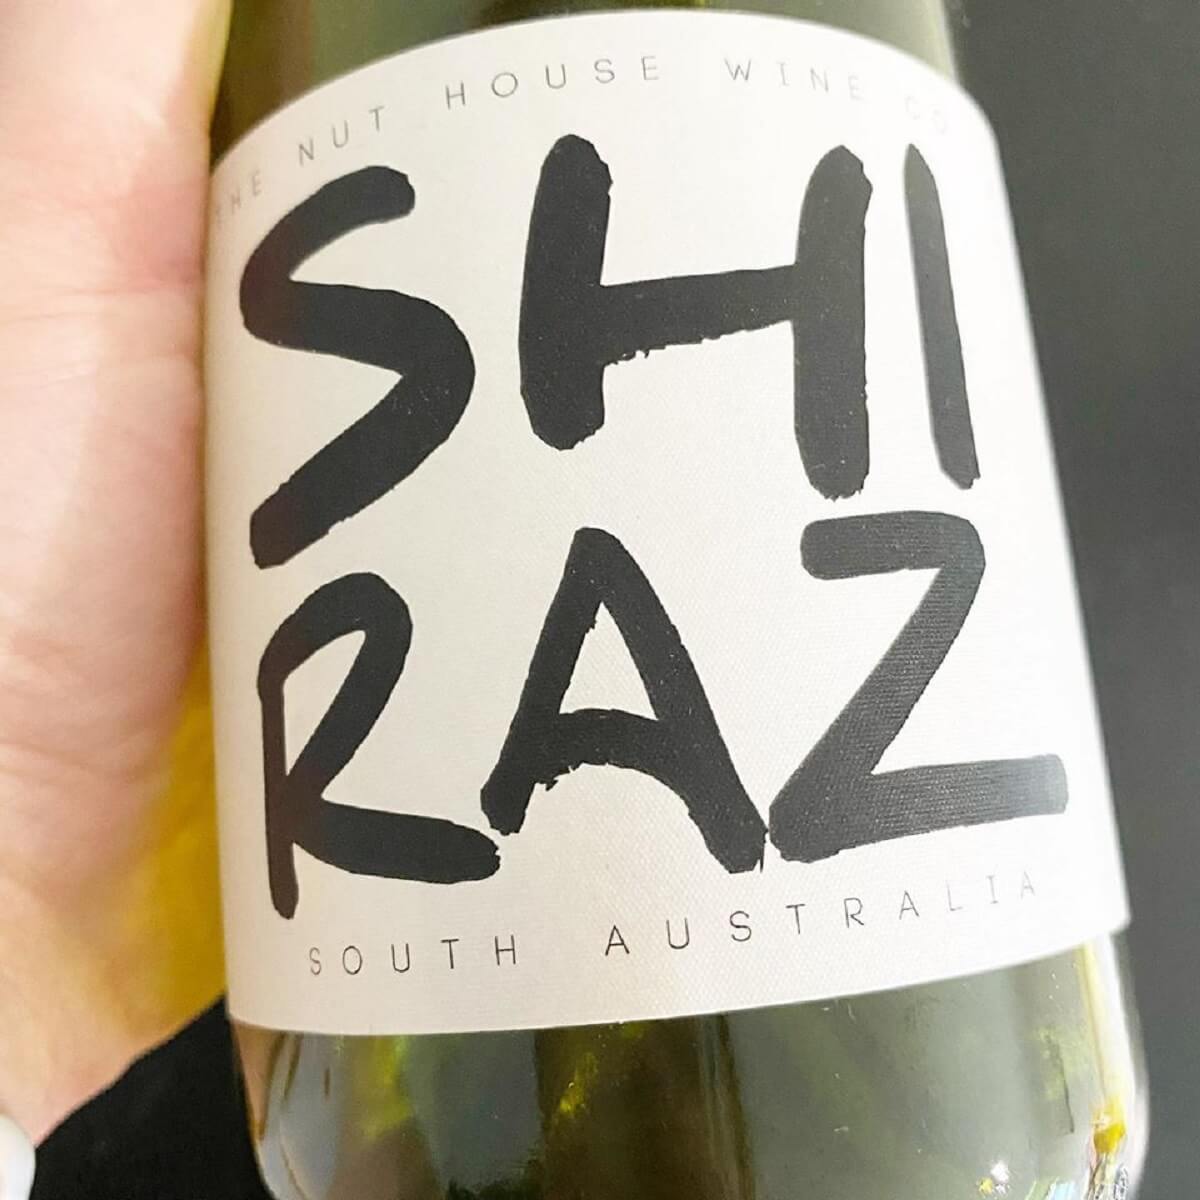 The Nut House Wine Co Shiraz – Curtis Family Vineyards